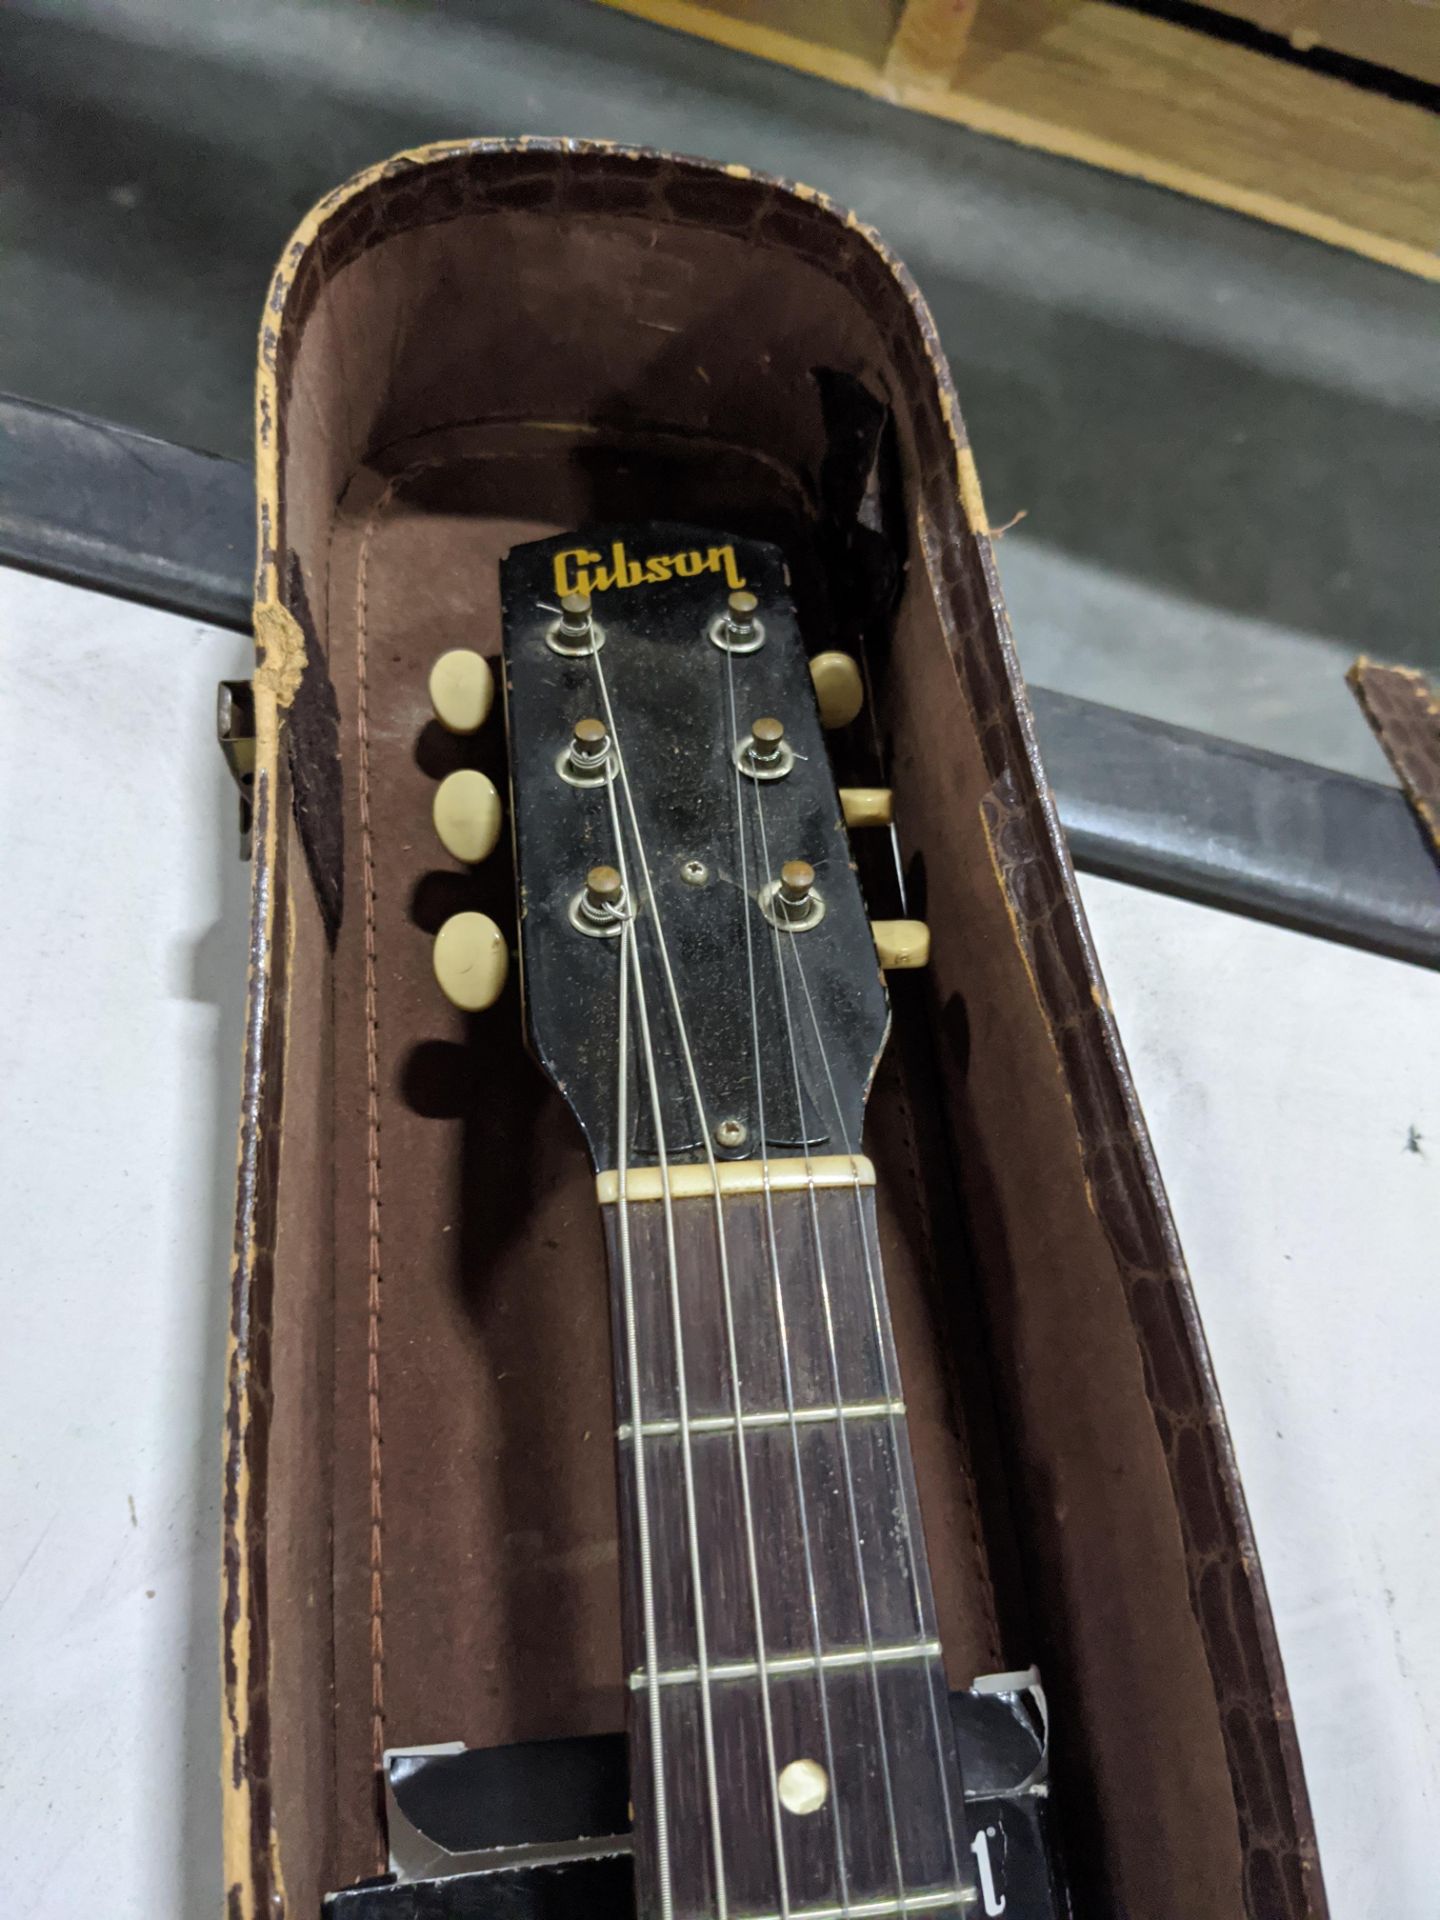 1960s GIbson Melody Maker - Image 4 of 7